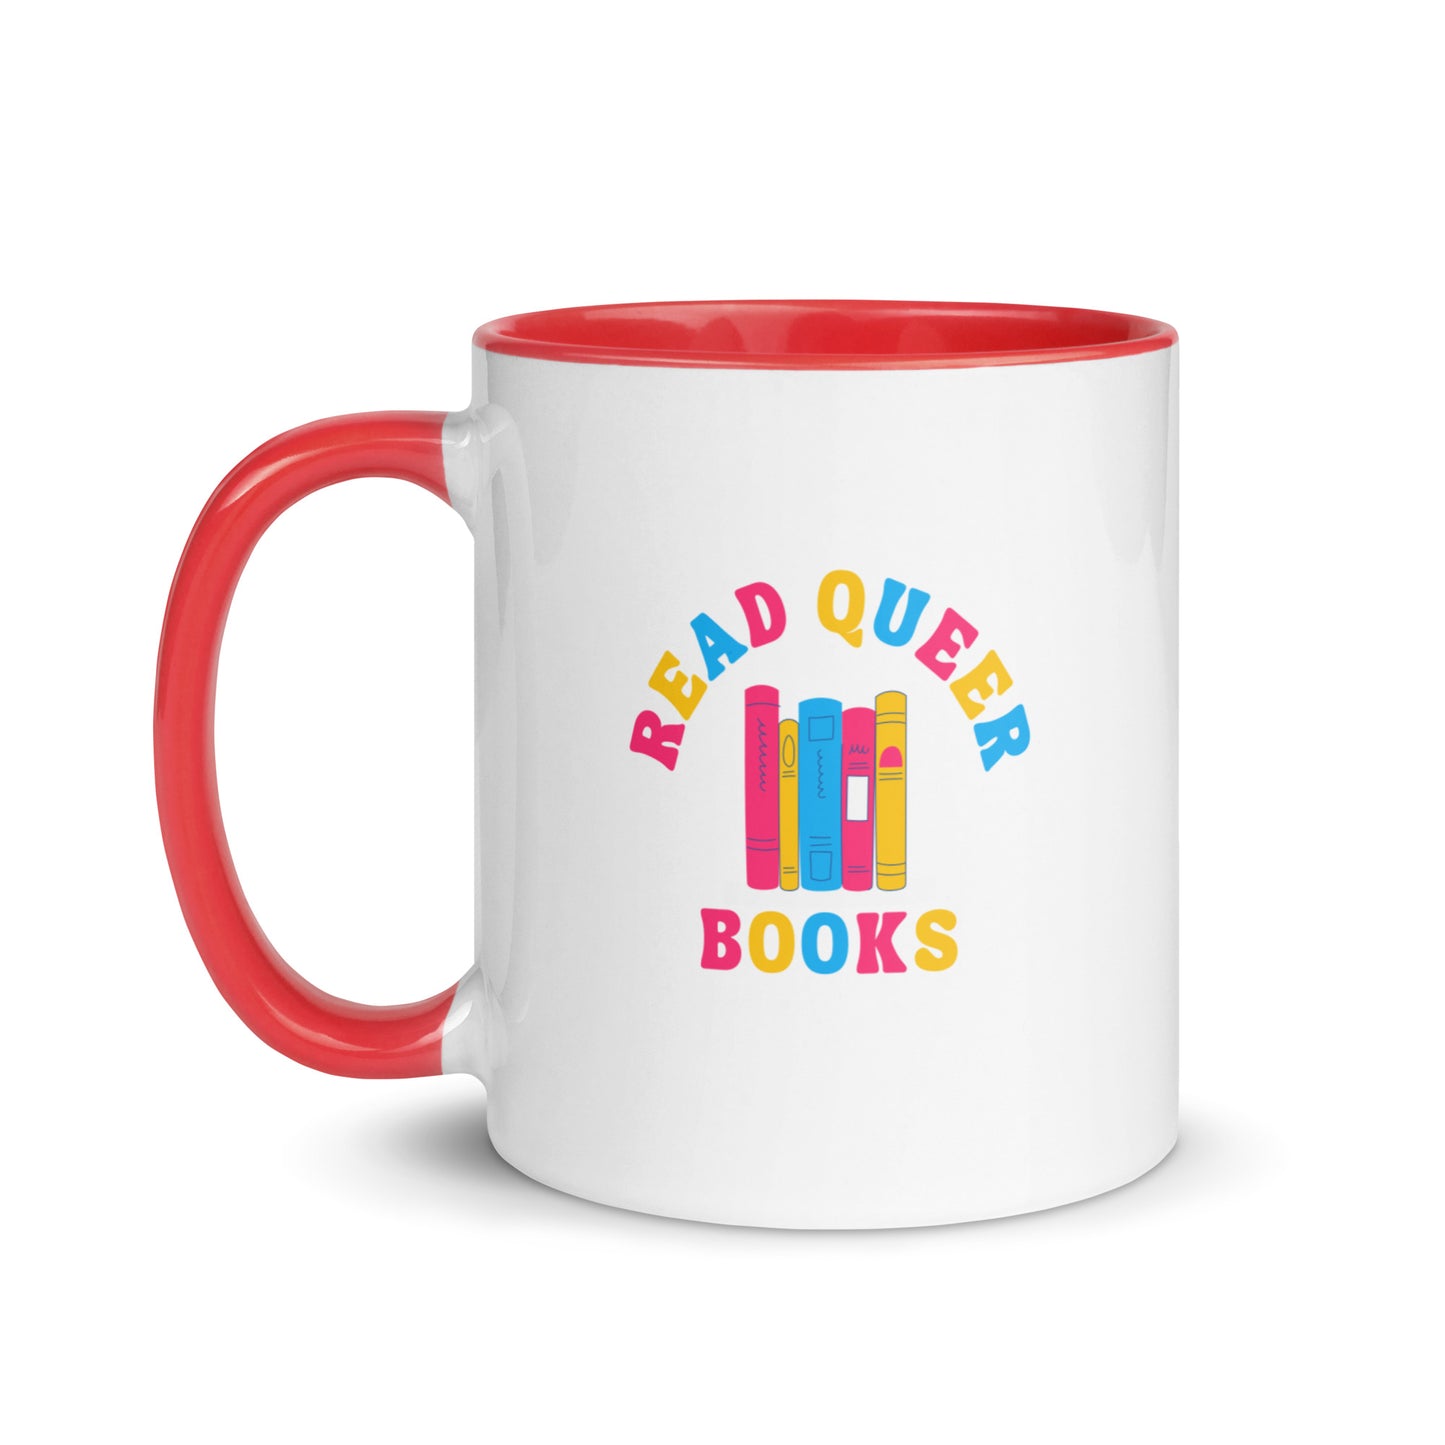 Read Queer Books (Pansexual Colors) Mug with Color Inside